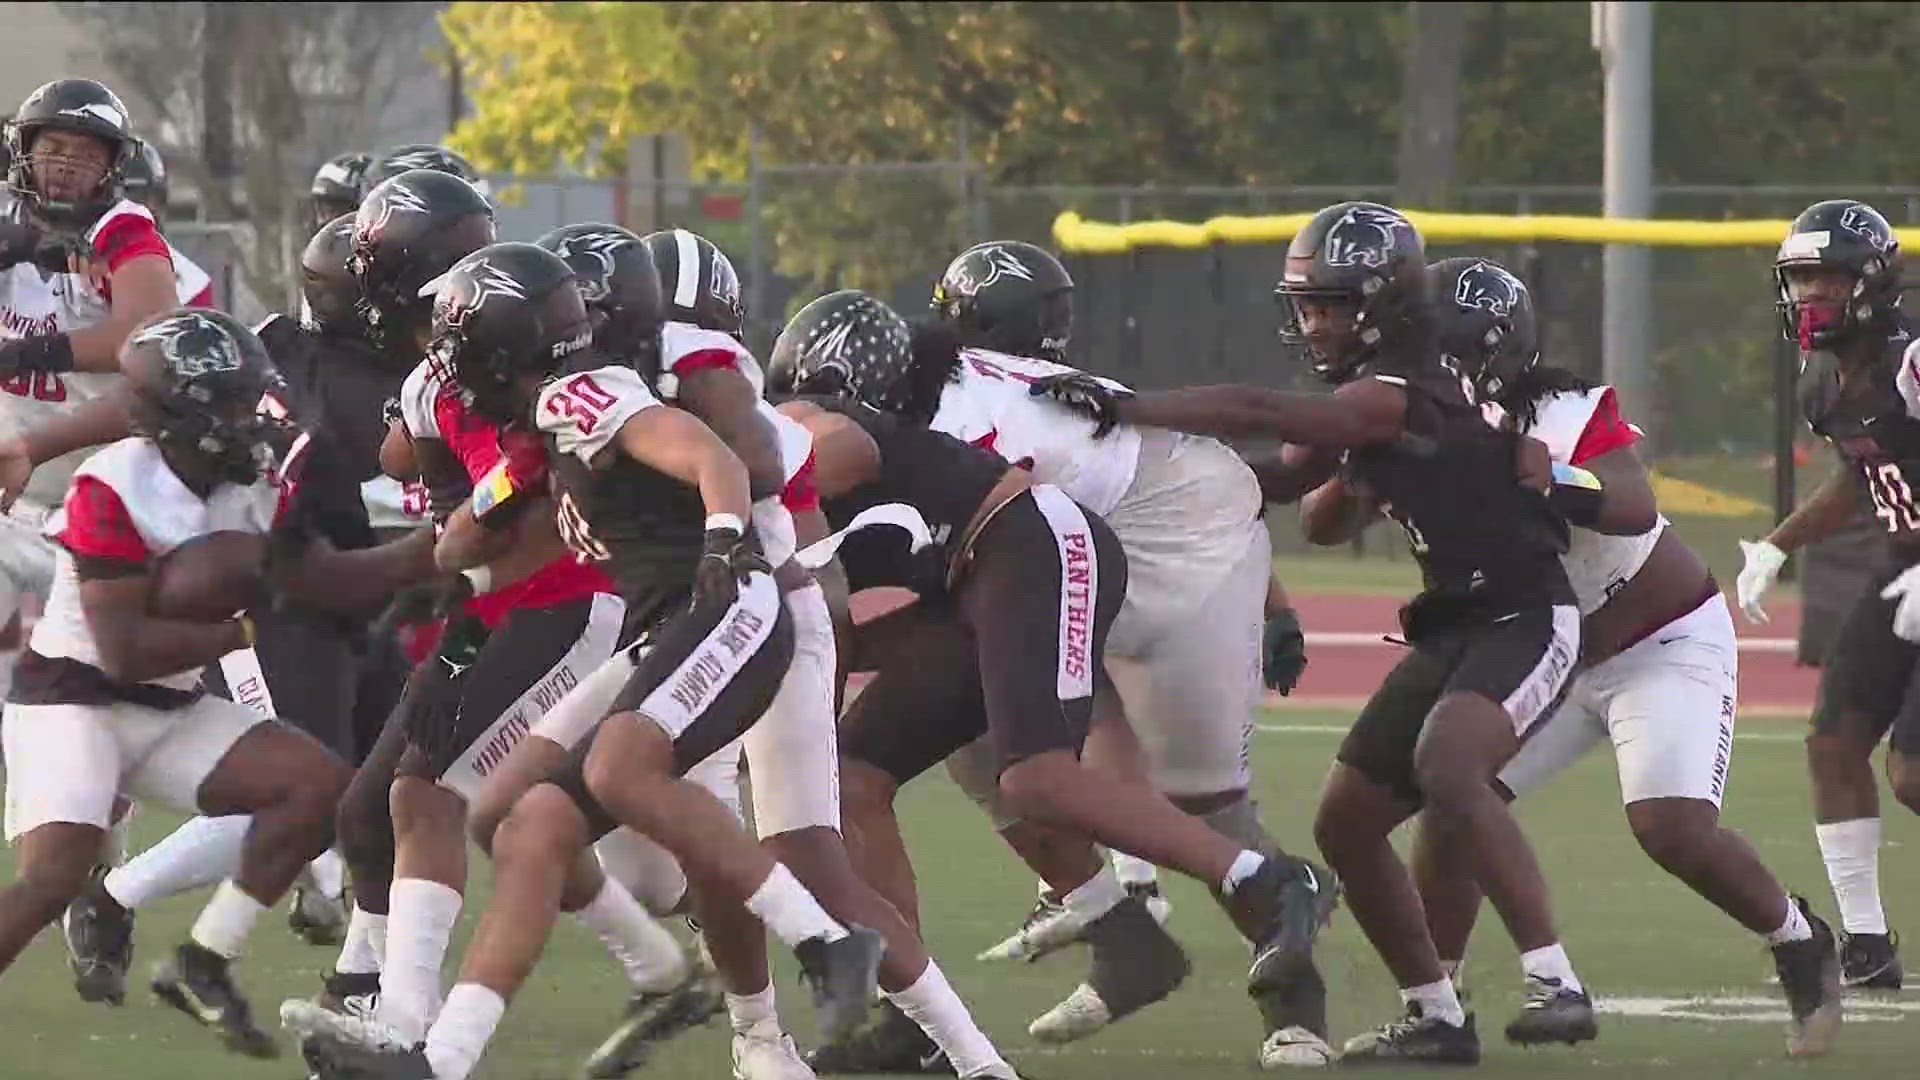 It's been a busy spring for the Clark Atlanta football program that is entering a new era this year.